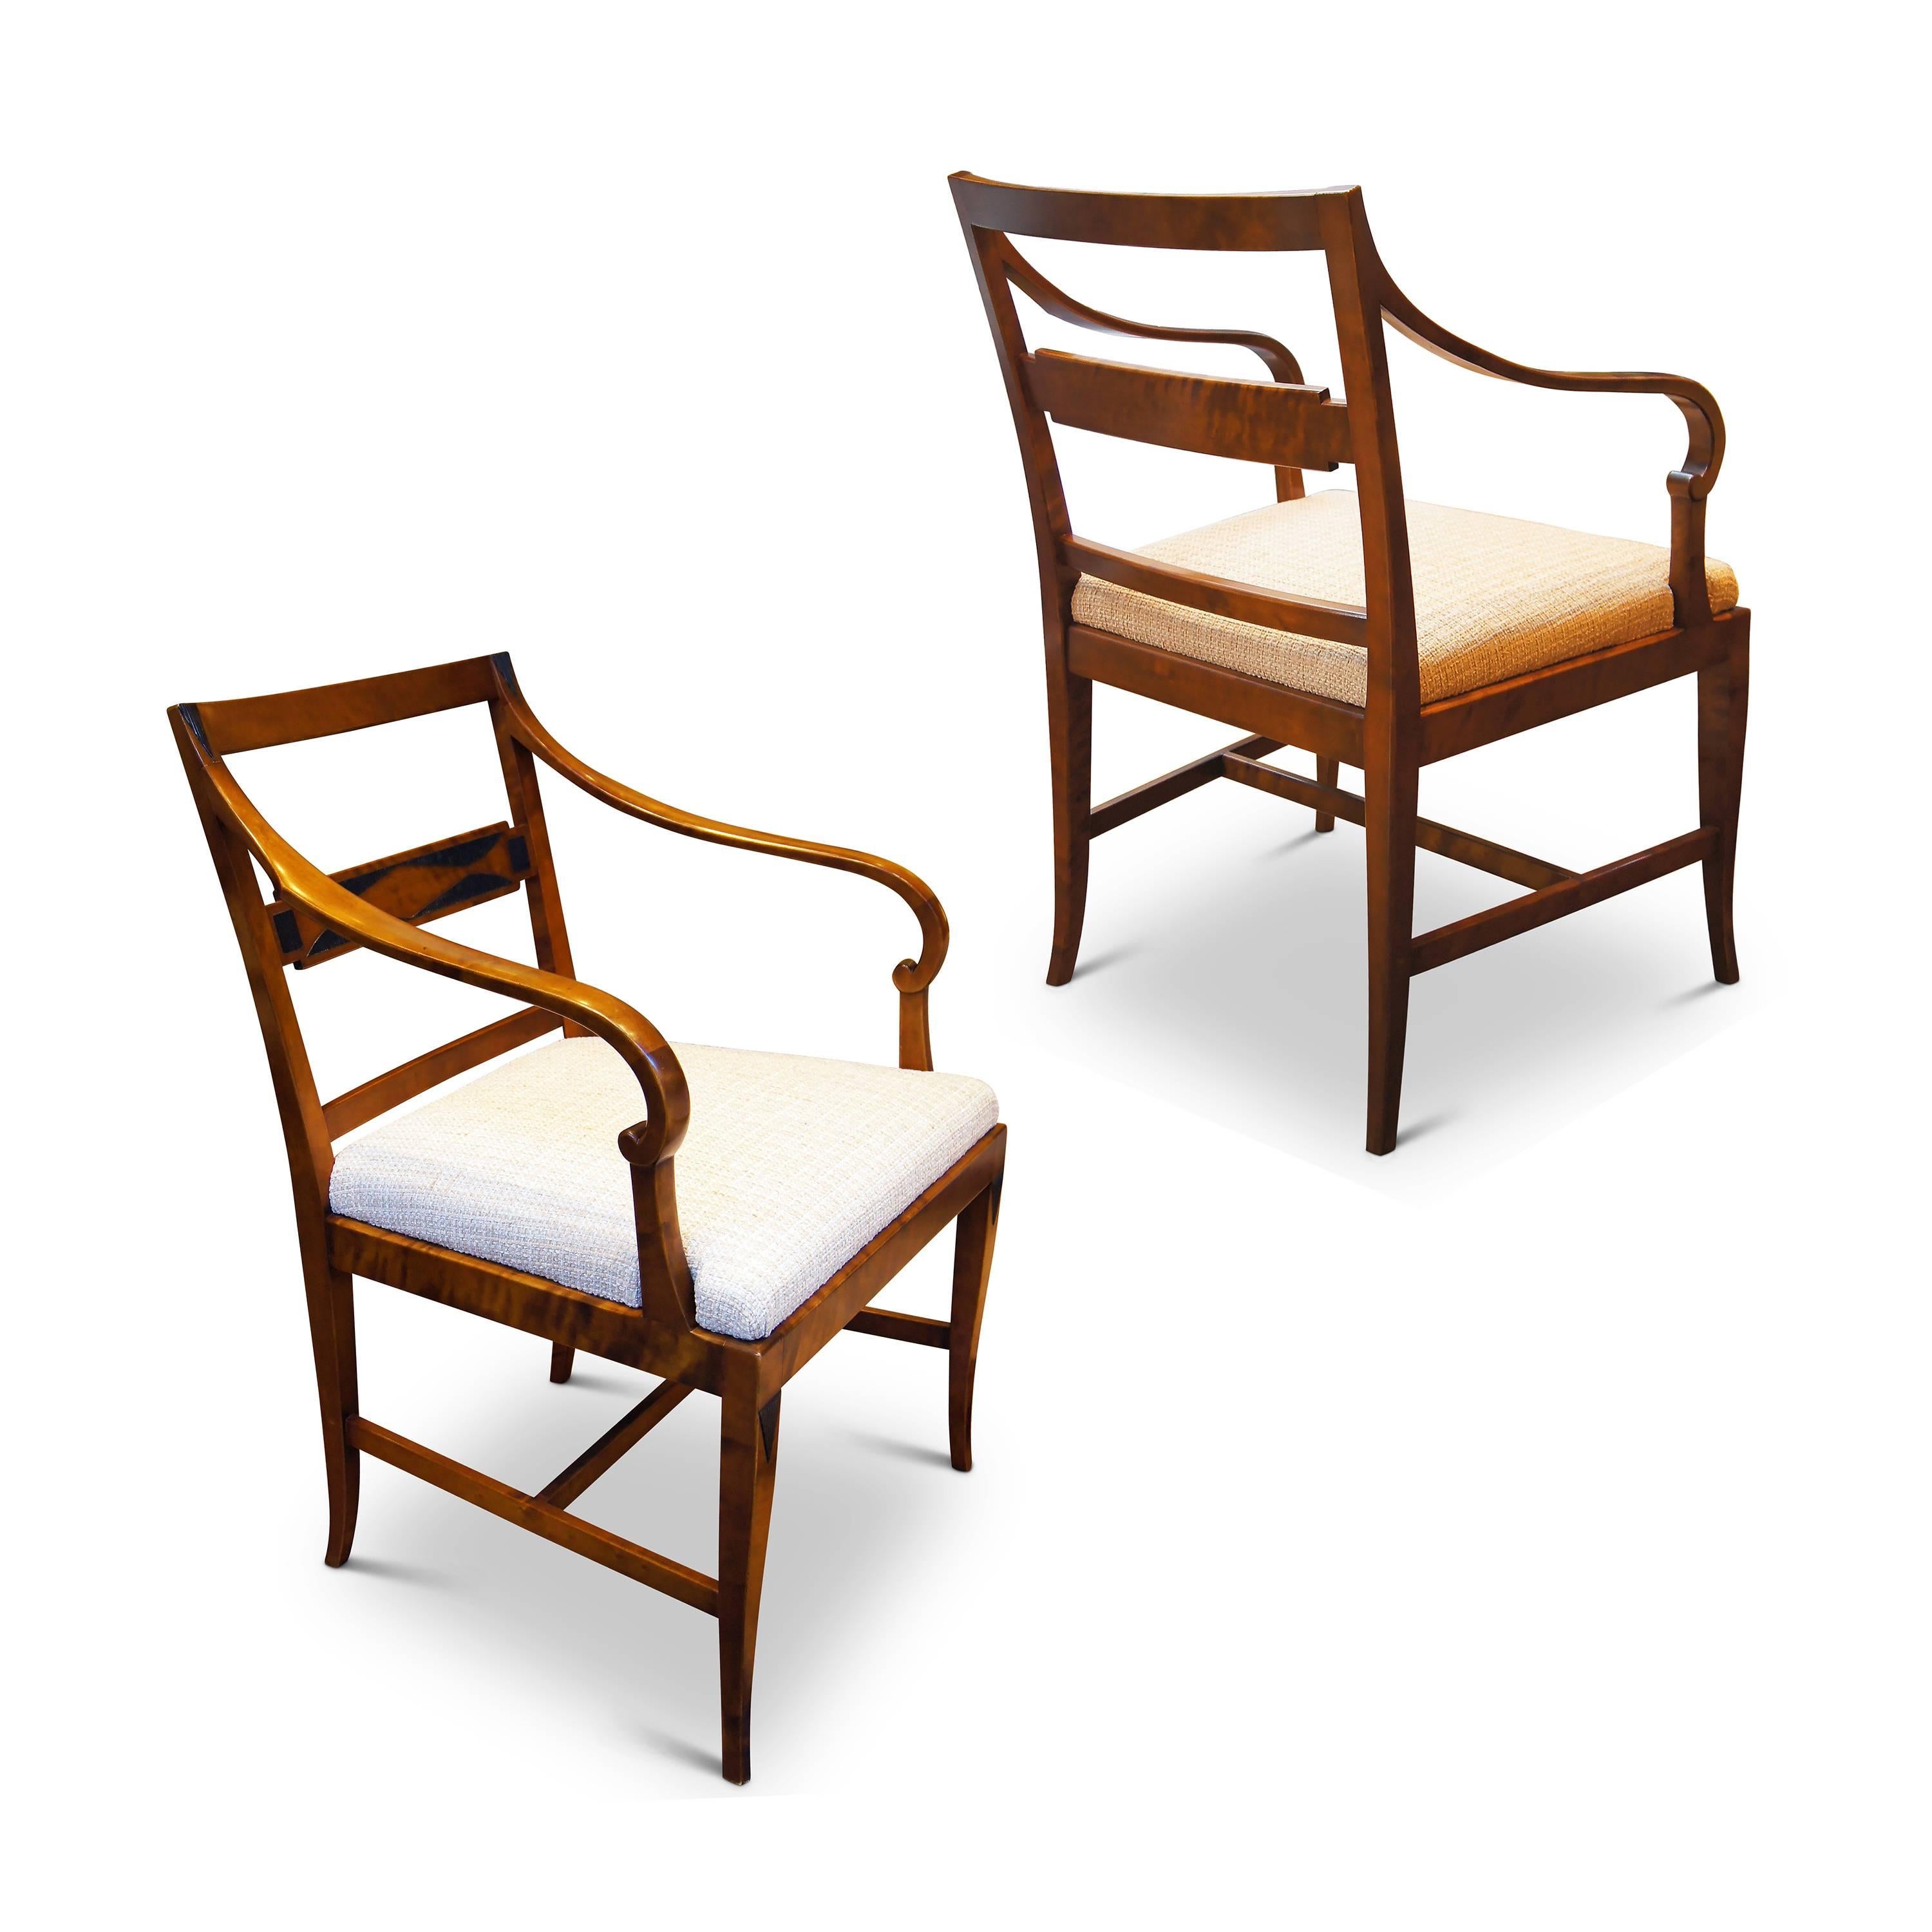 Early 20th Century Pair of Art Deco Modern Classicism Armchairs in Birch by Carl Malmsten For Sale